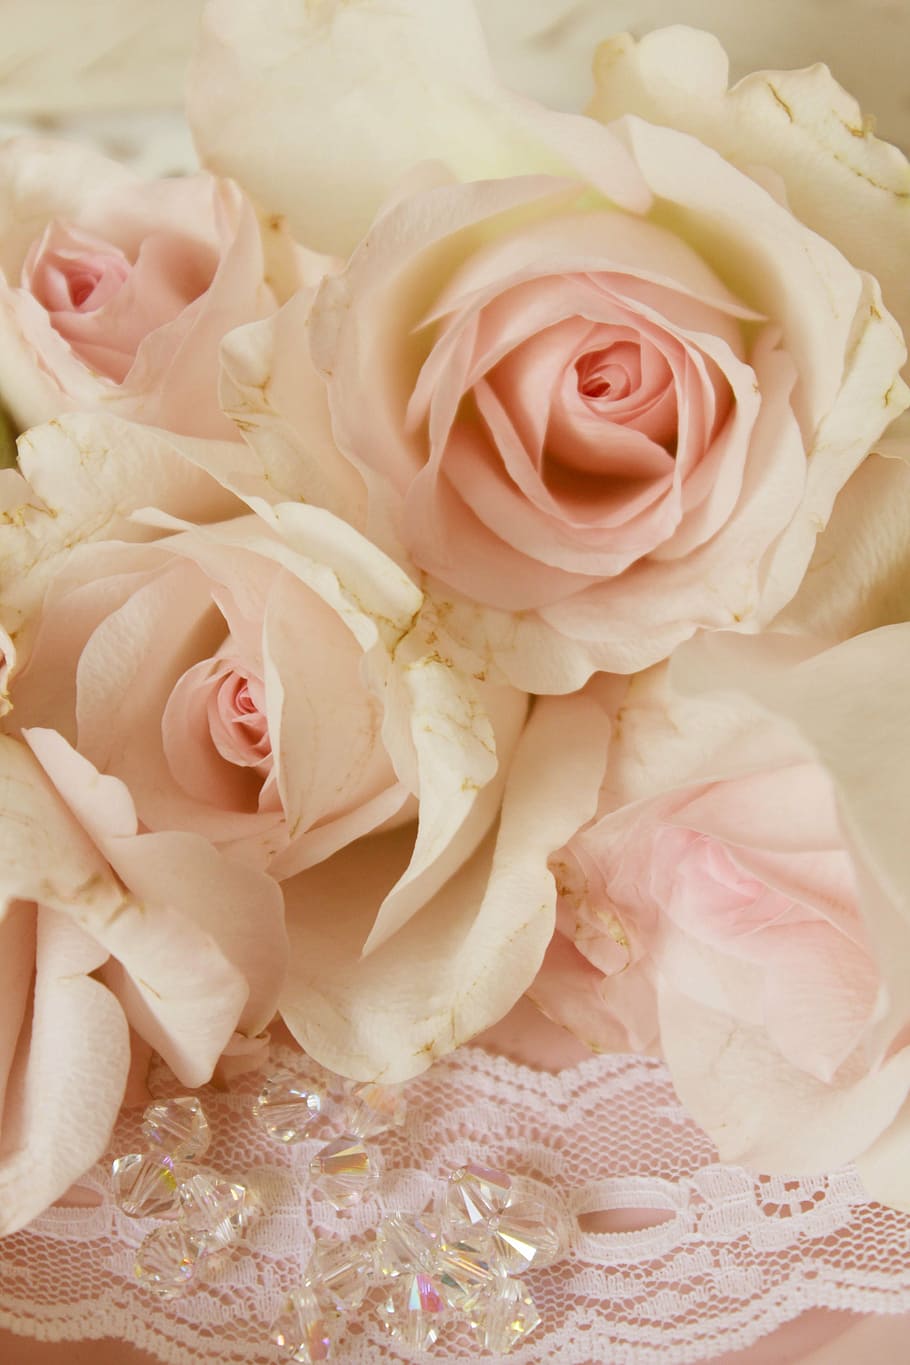 white, pink, roses, pink roses, beads, background, playful, romantic, wedding, engagement